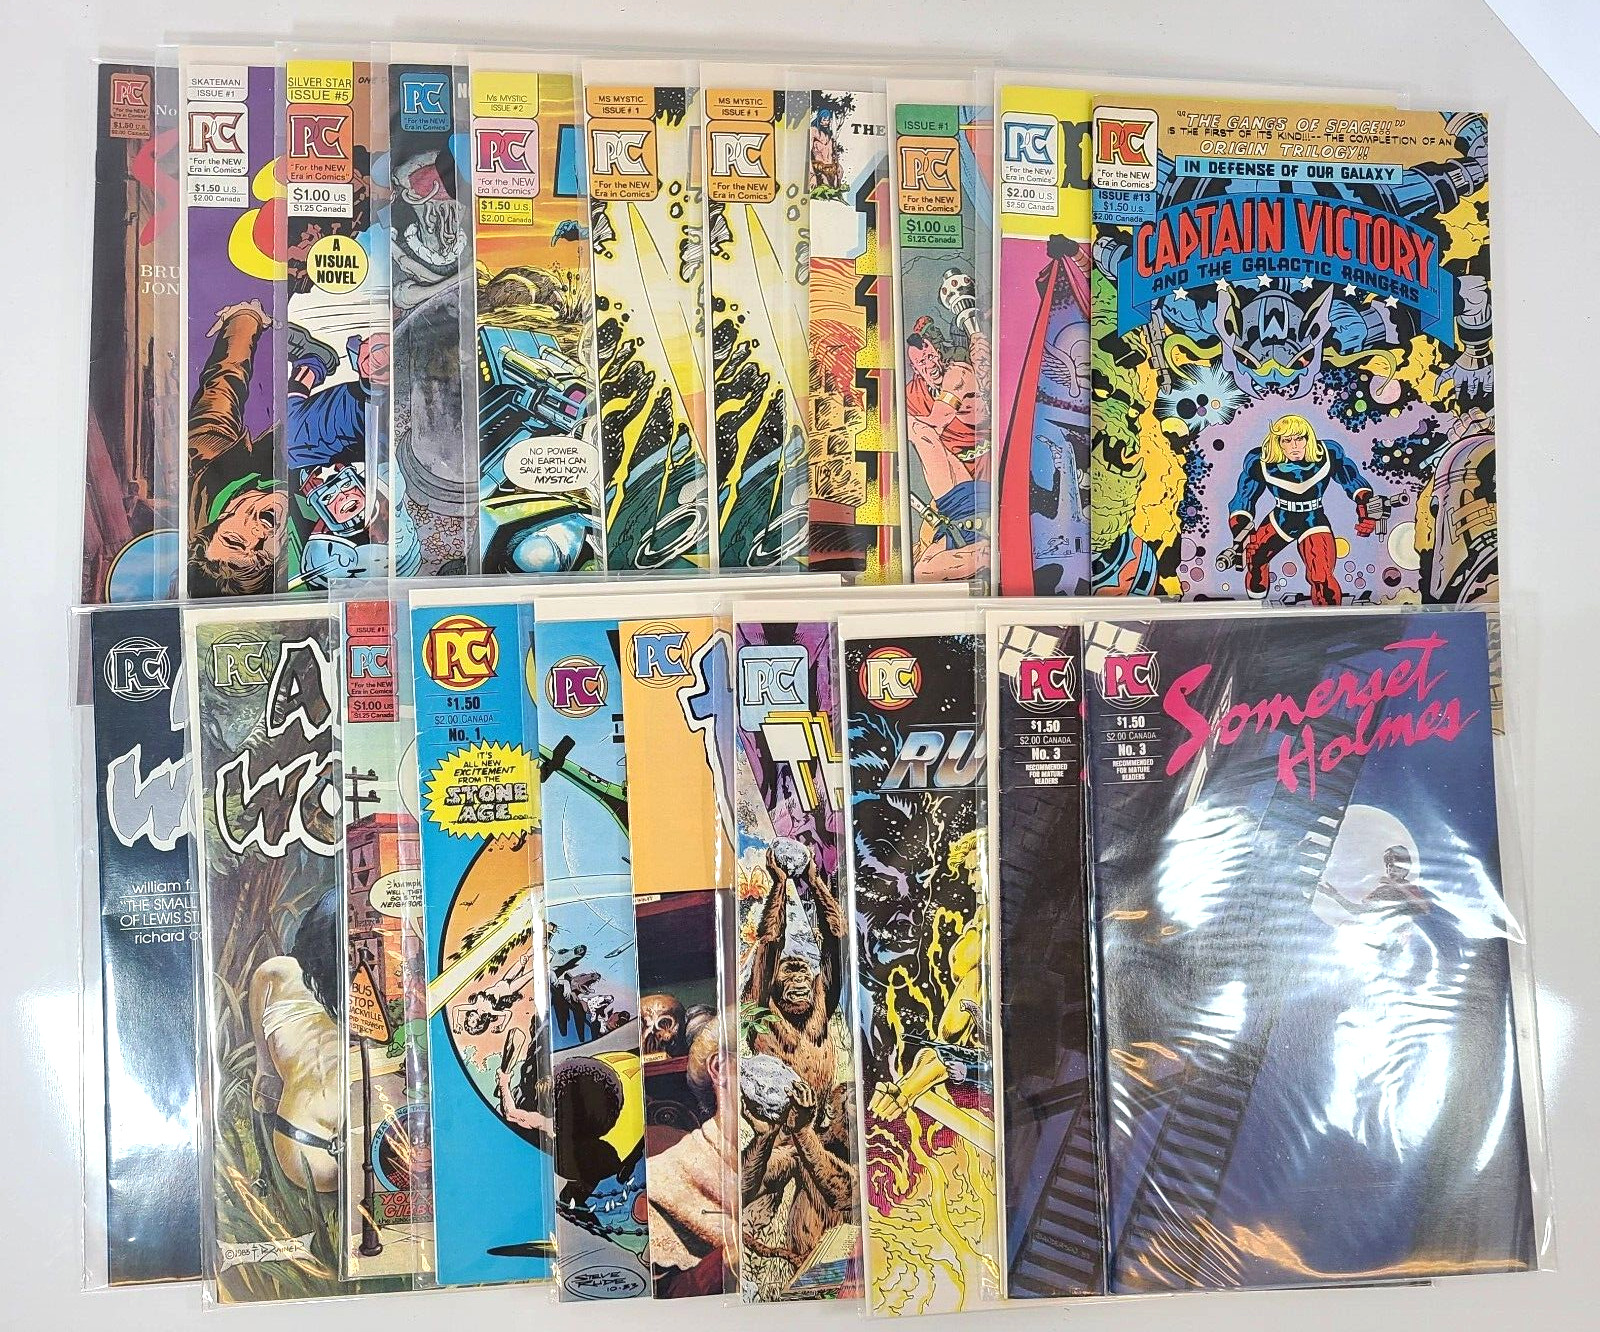 Mixed Lot of 21 Pacific Comics - Alien Worlds, Ms Mystic, Somerset Holmes, & Mor